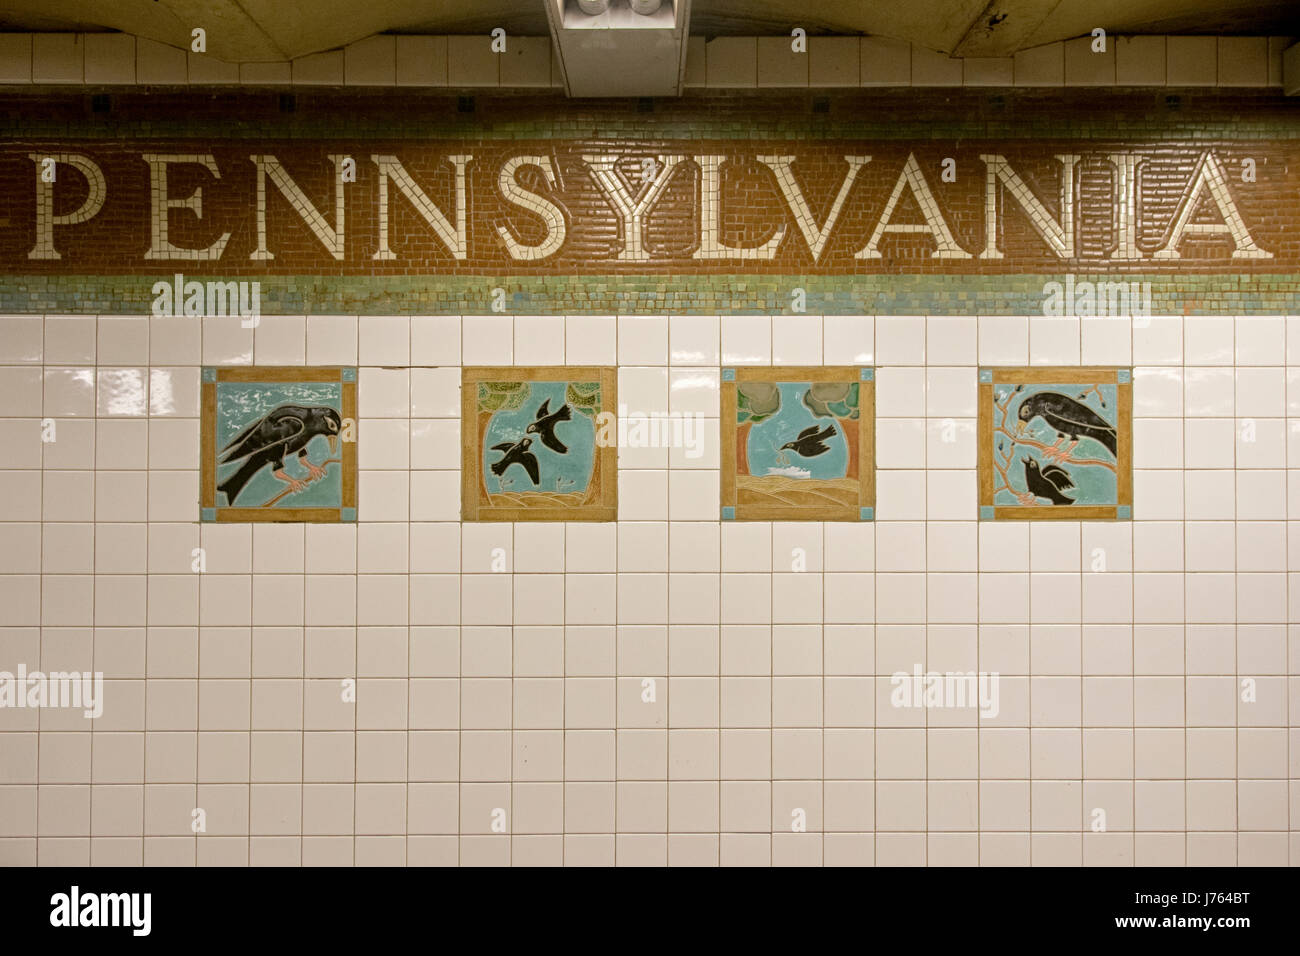 Subway art at the Penn Station stop on the Stock Photo